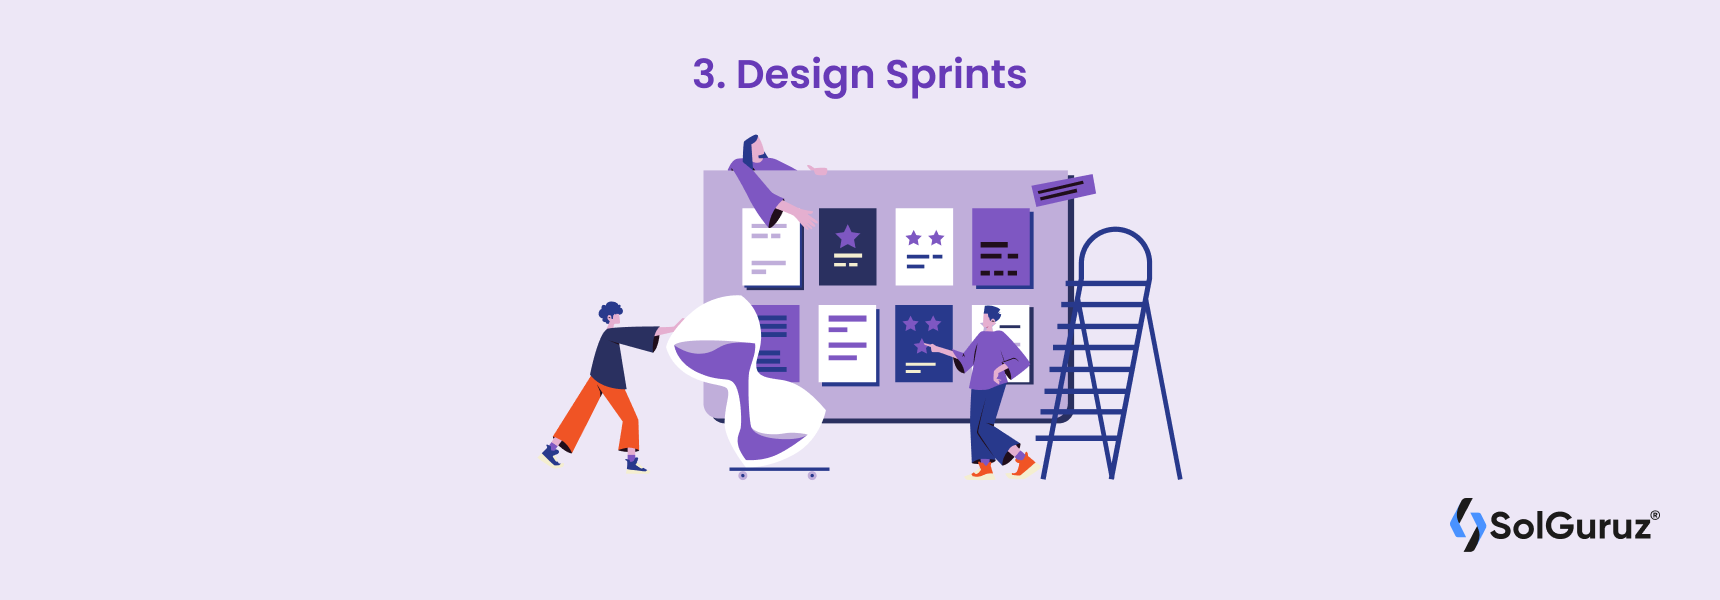 Design Sprints phase in the custom software development allows you to construct a rudimentary design for a desired feature, which can then be tested with users to glean valuable feedback.